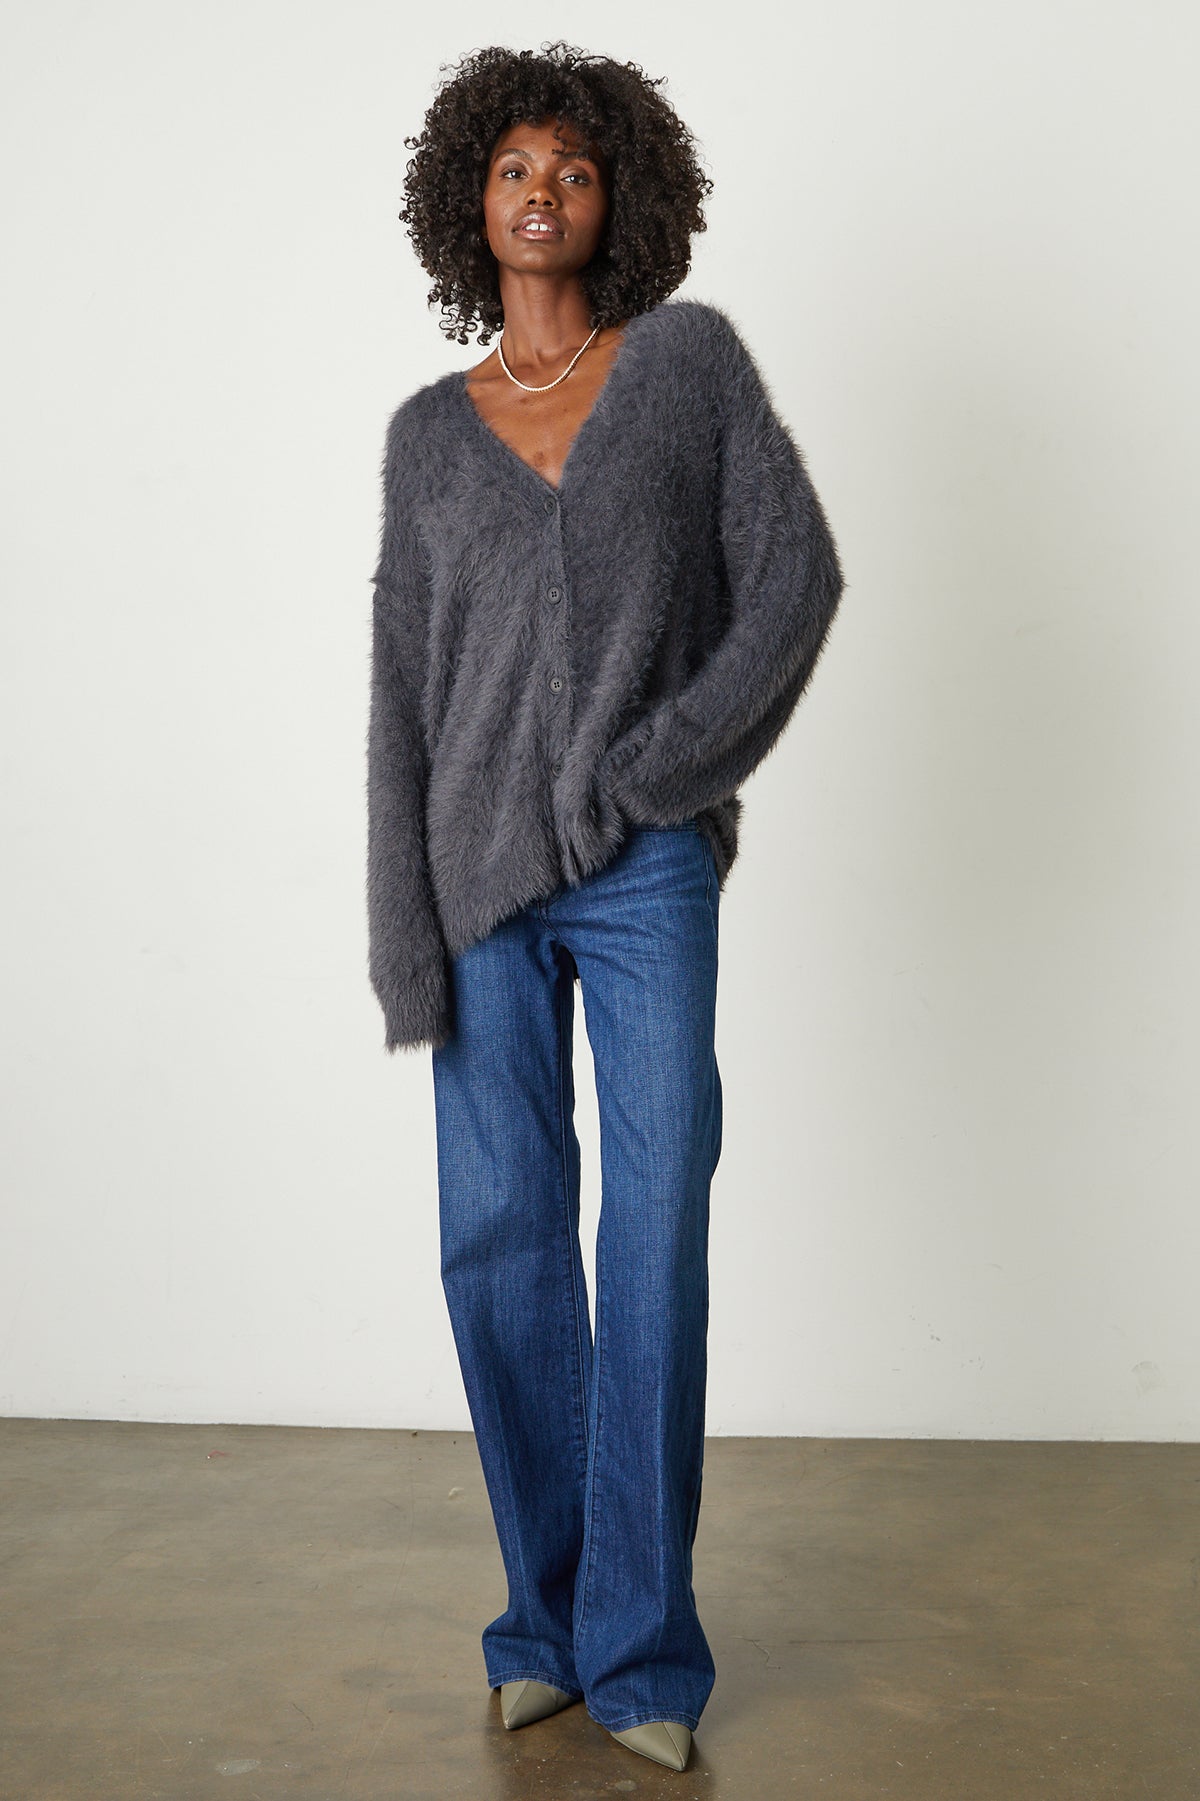   Barb Feather Yarn Button Front Cardigan in charcoal grey with blue denim and heels full length front 